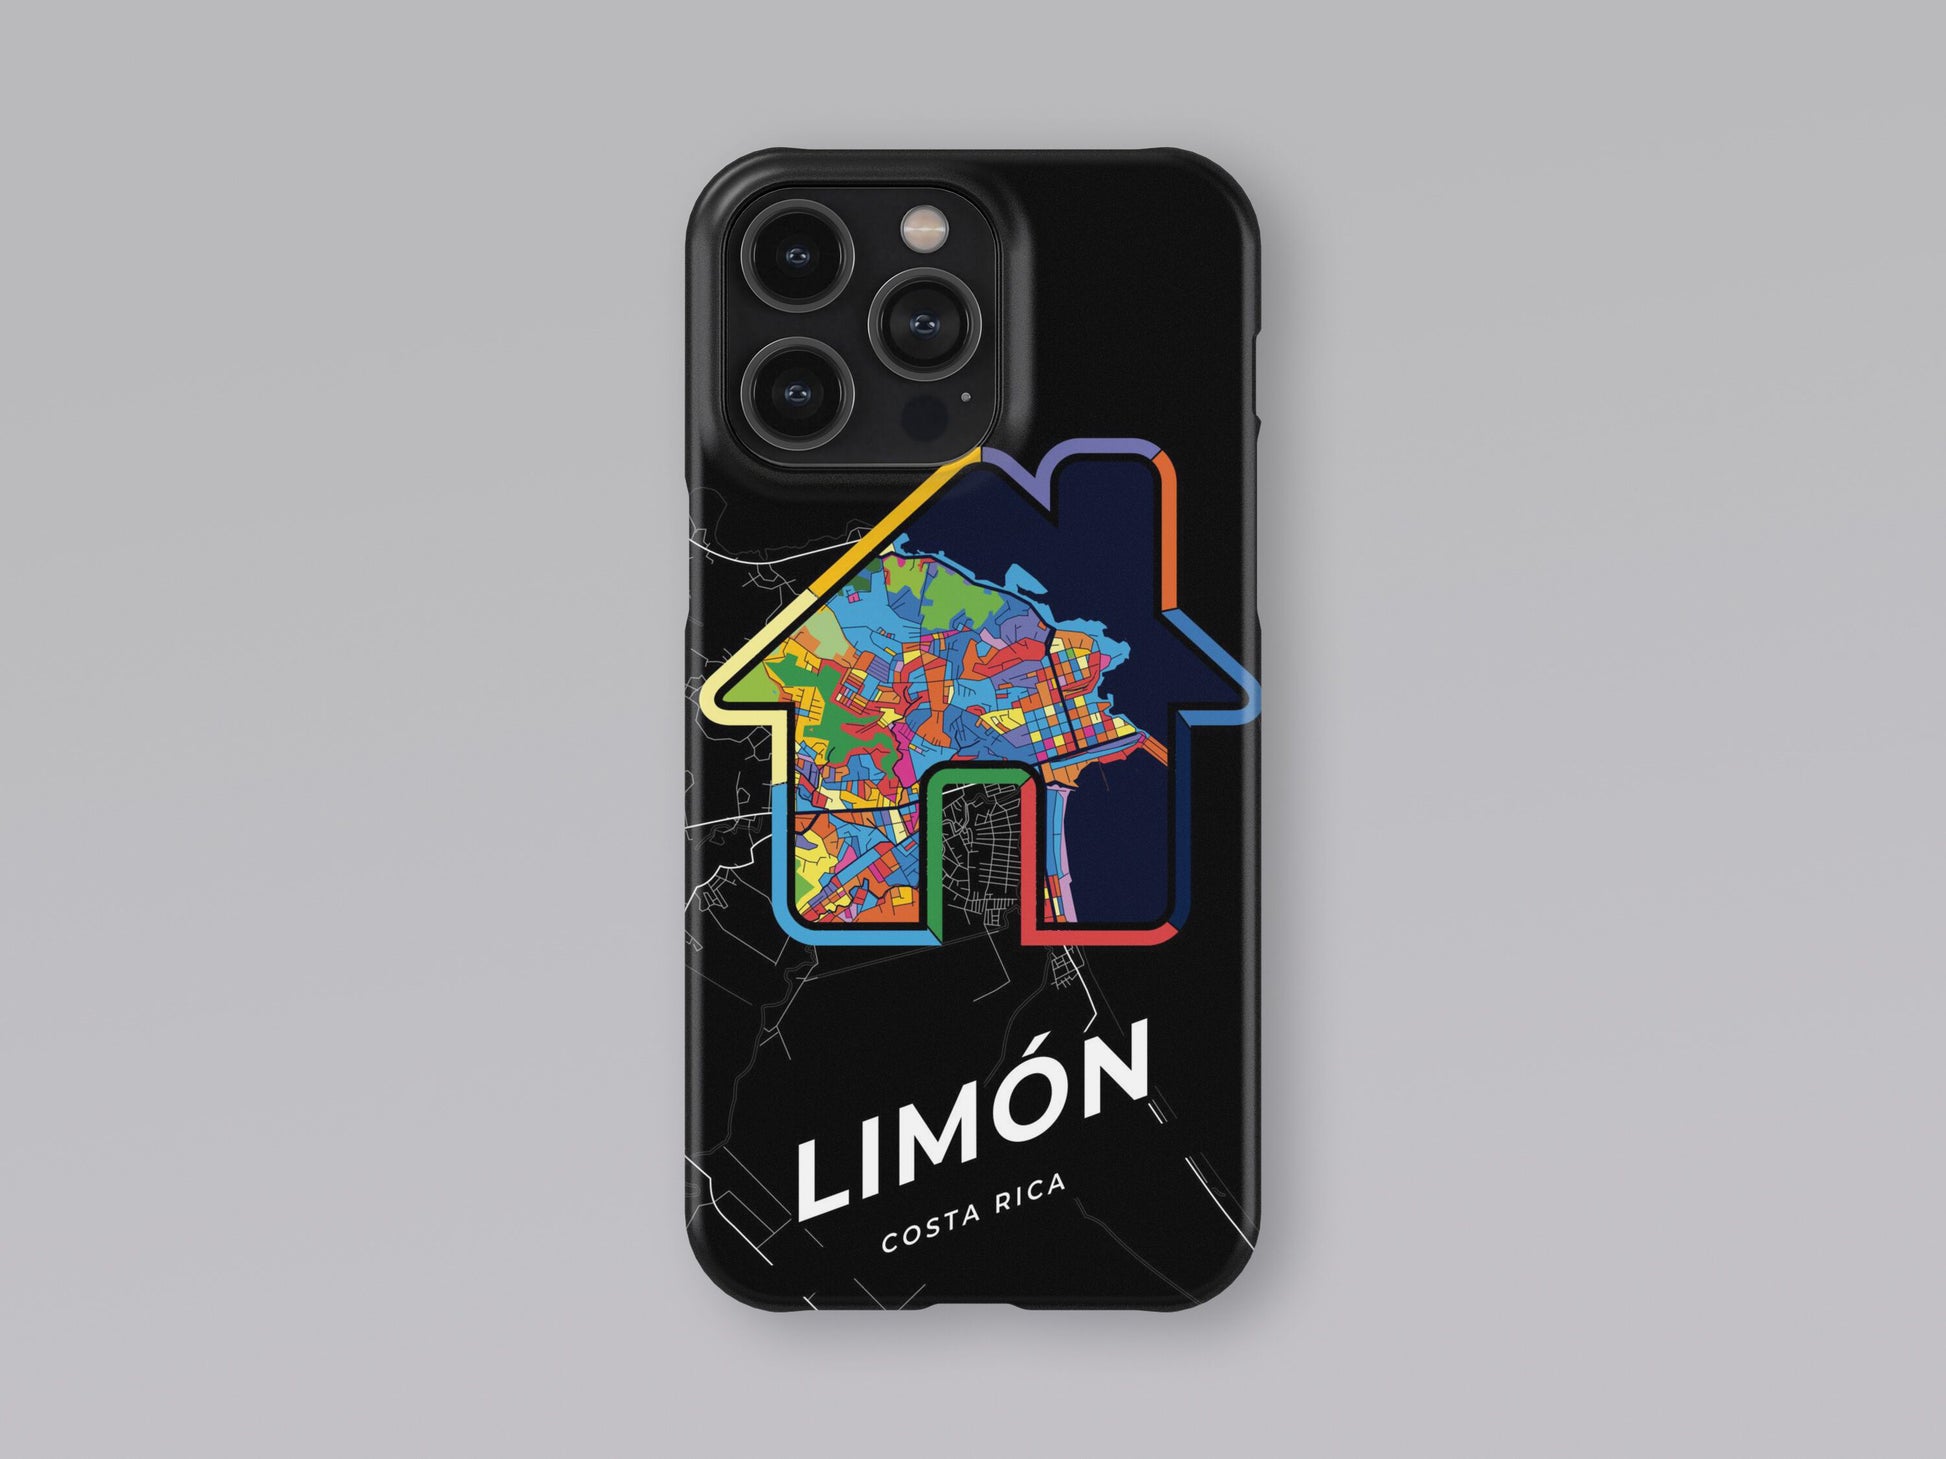 Limón Costa Rica slim phone case with colorful icon. Birthday, wedding or housewarming gift. Couple match cases. 3